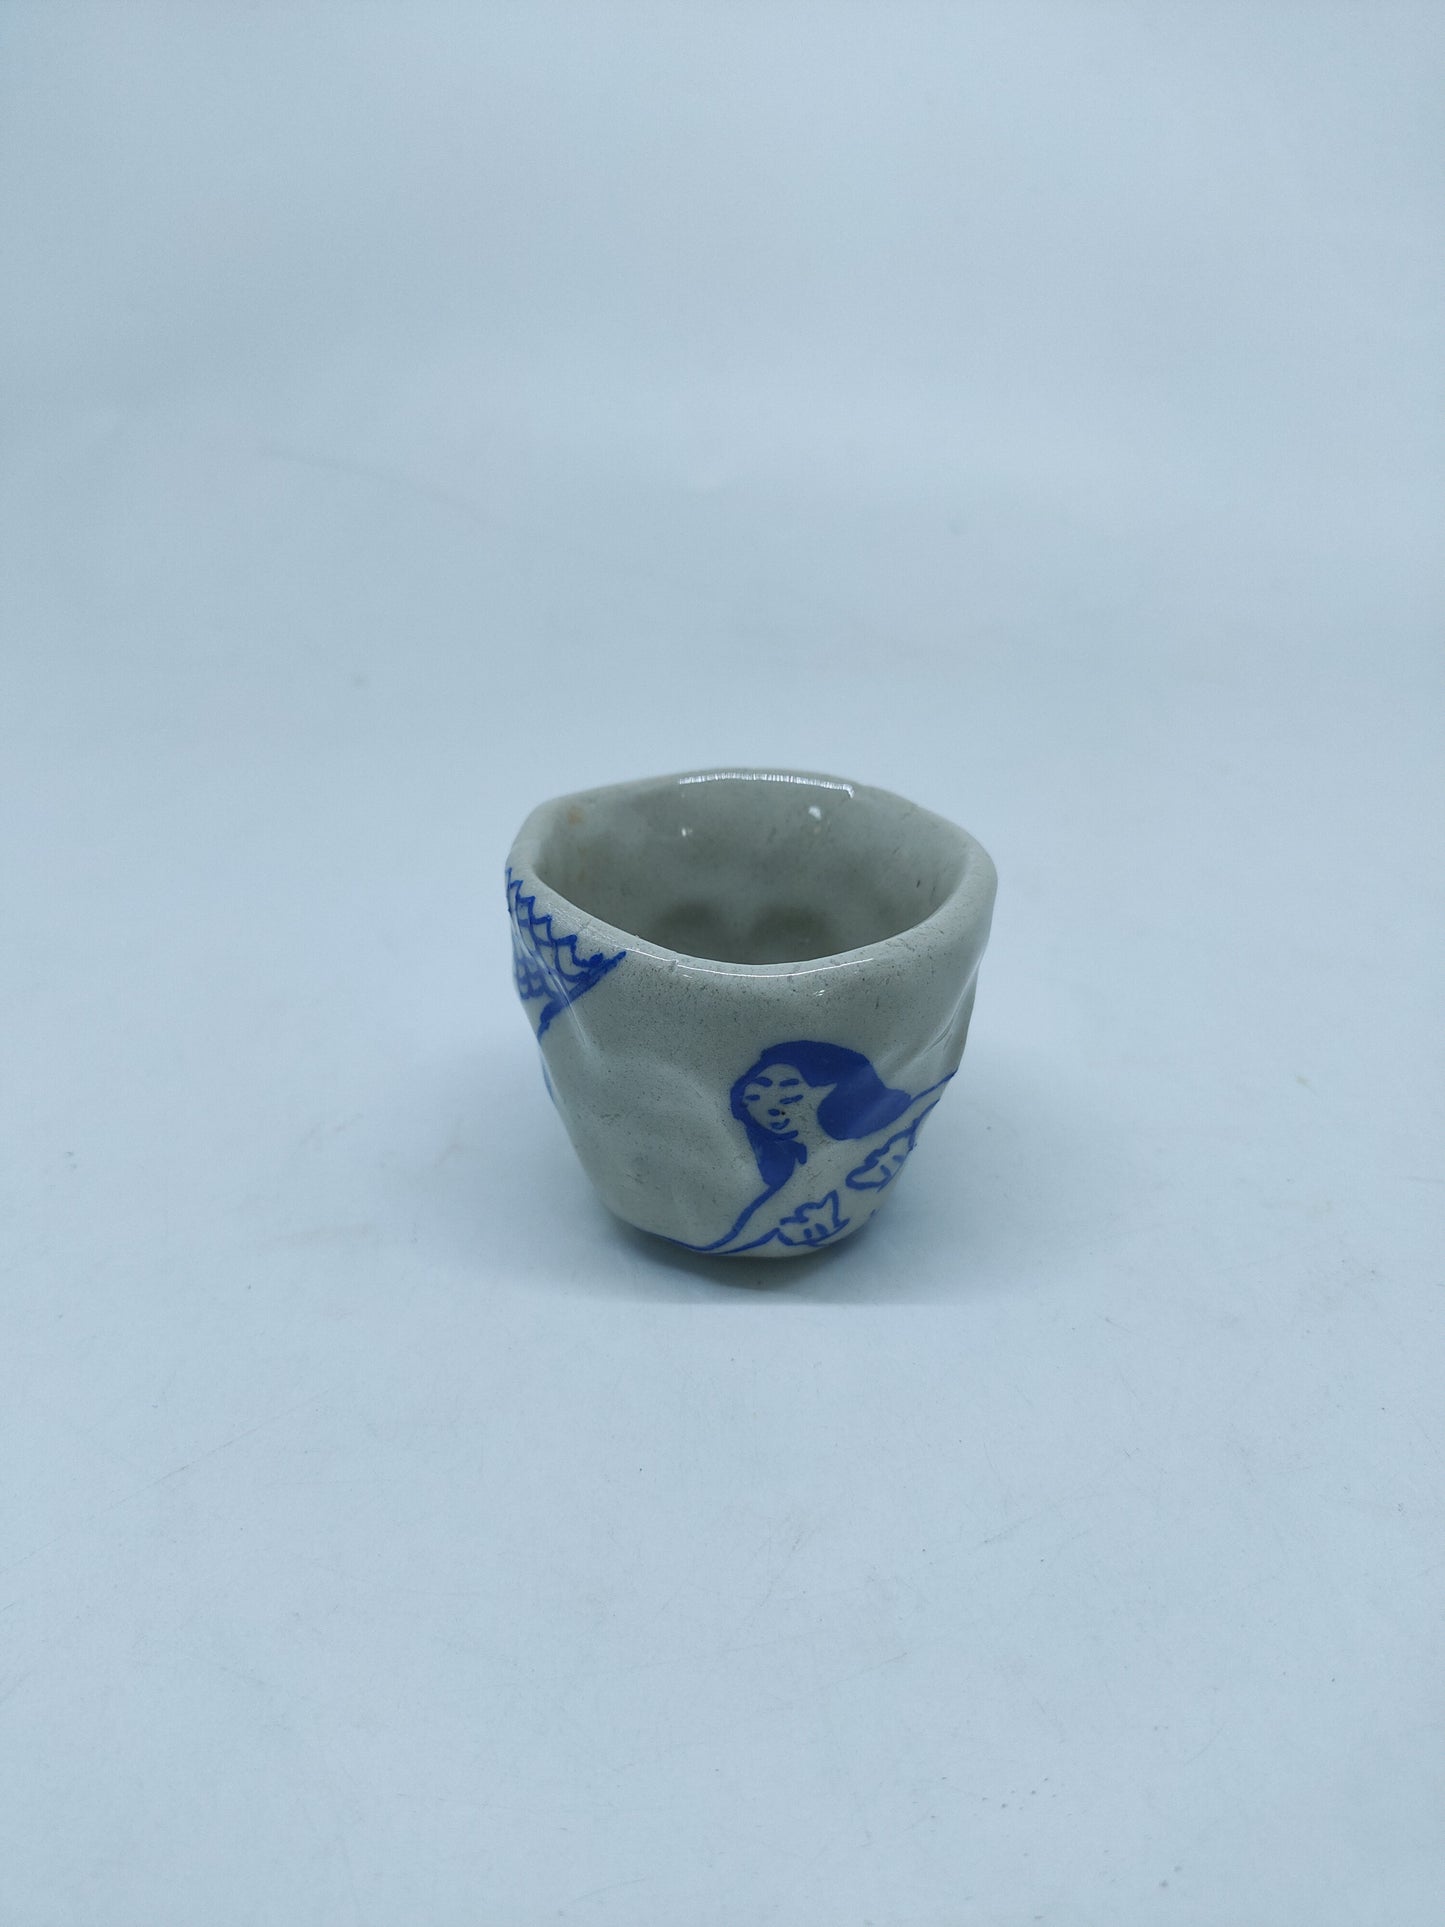 Mermaid Pinch Cup Small